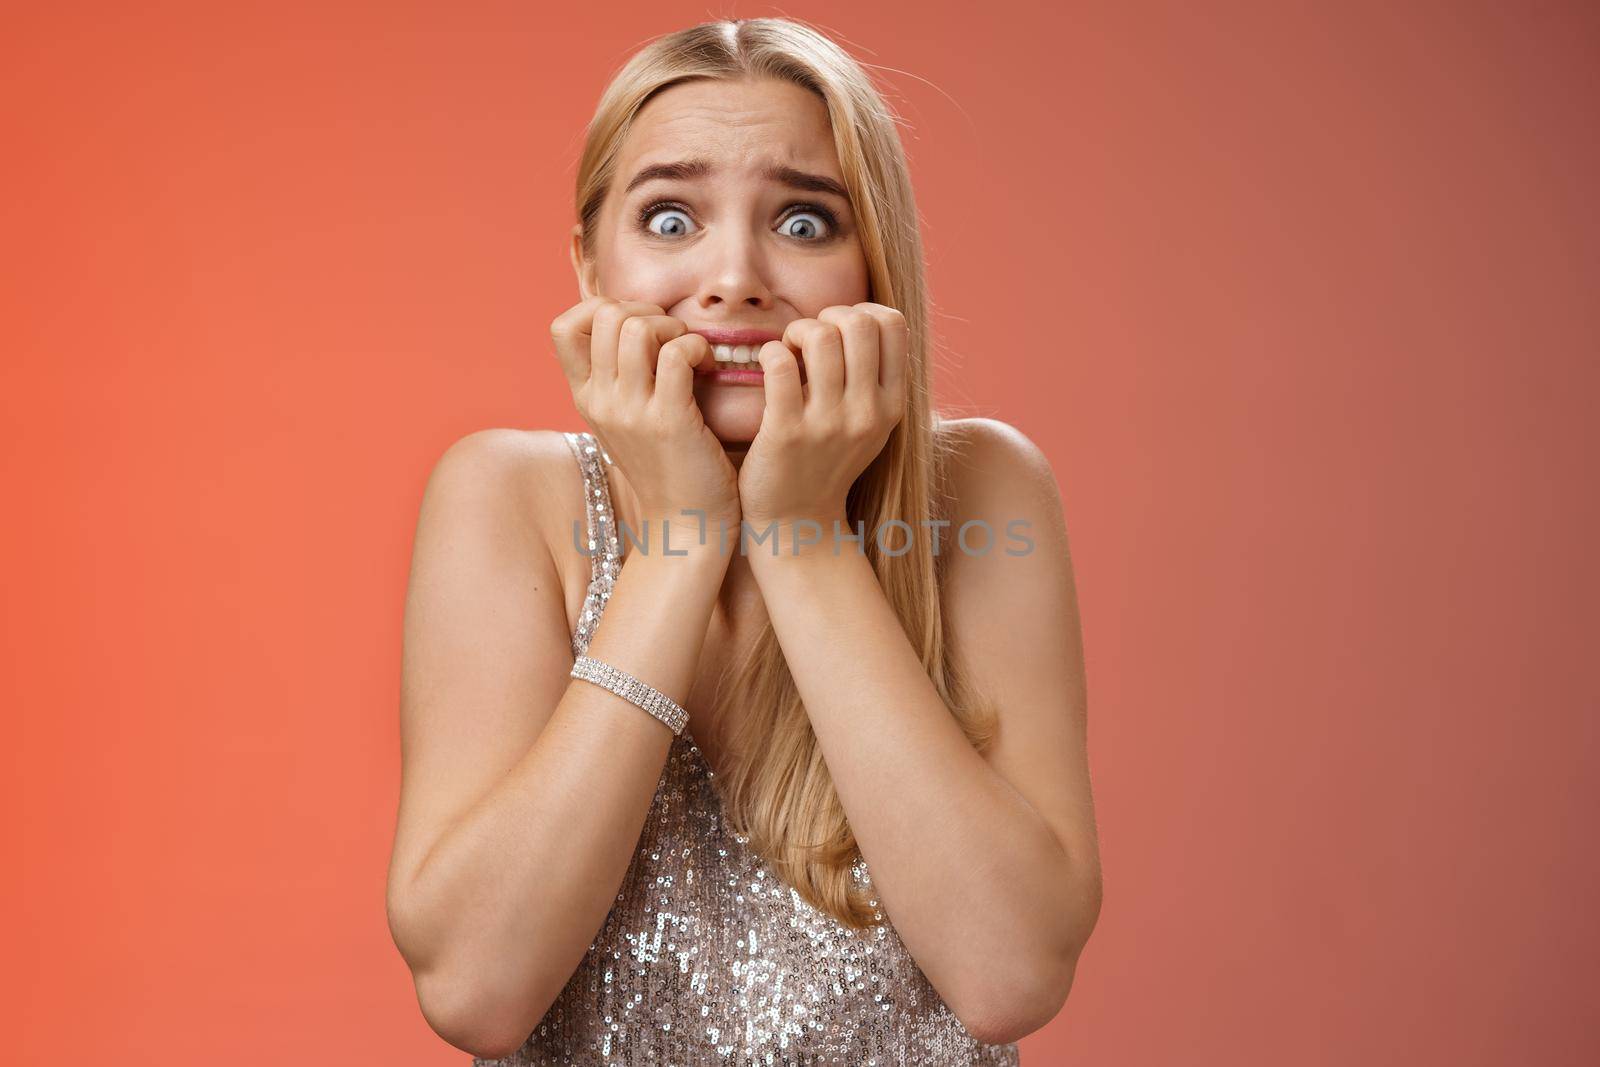 Frightened afraid panicking young cute blond woman biting nails pop eyes scared camera look terrified stunned speechless stare forward standing red background gasping trembling fear.